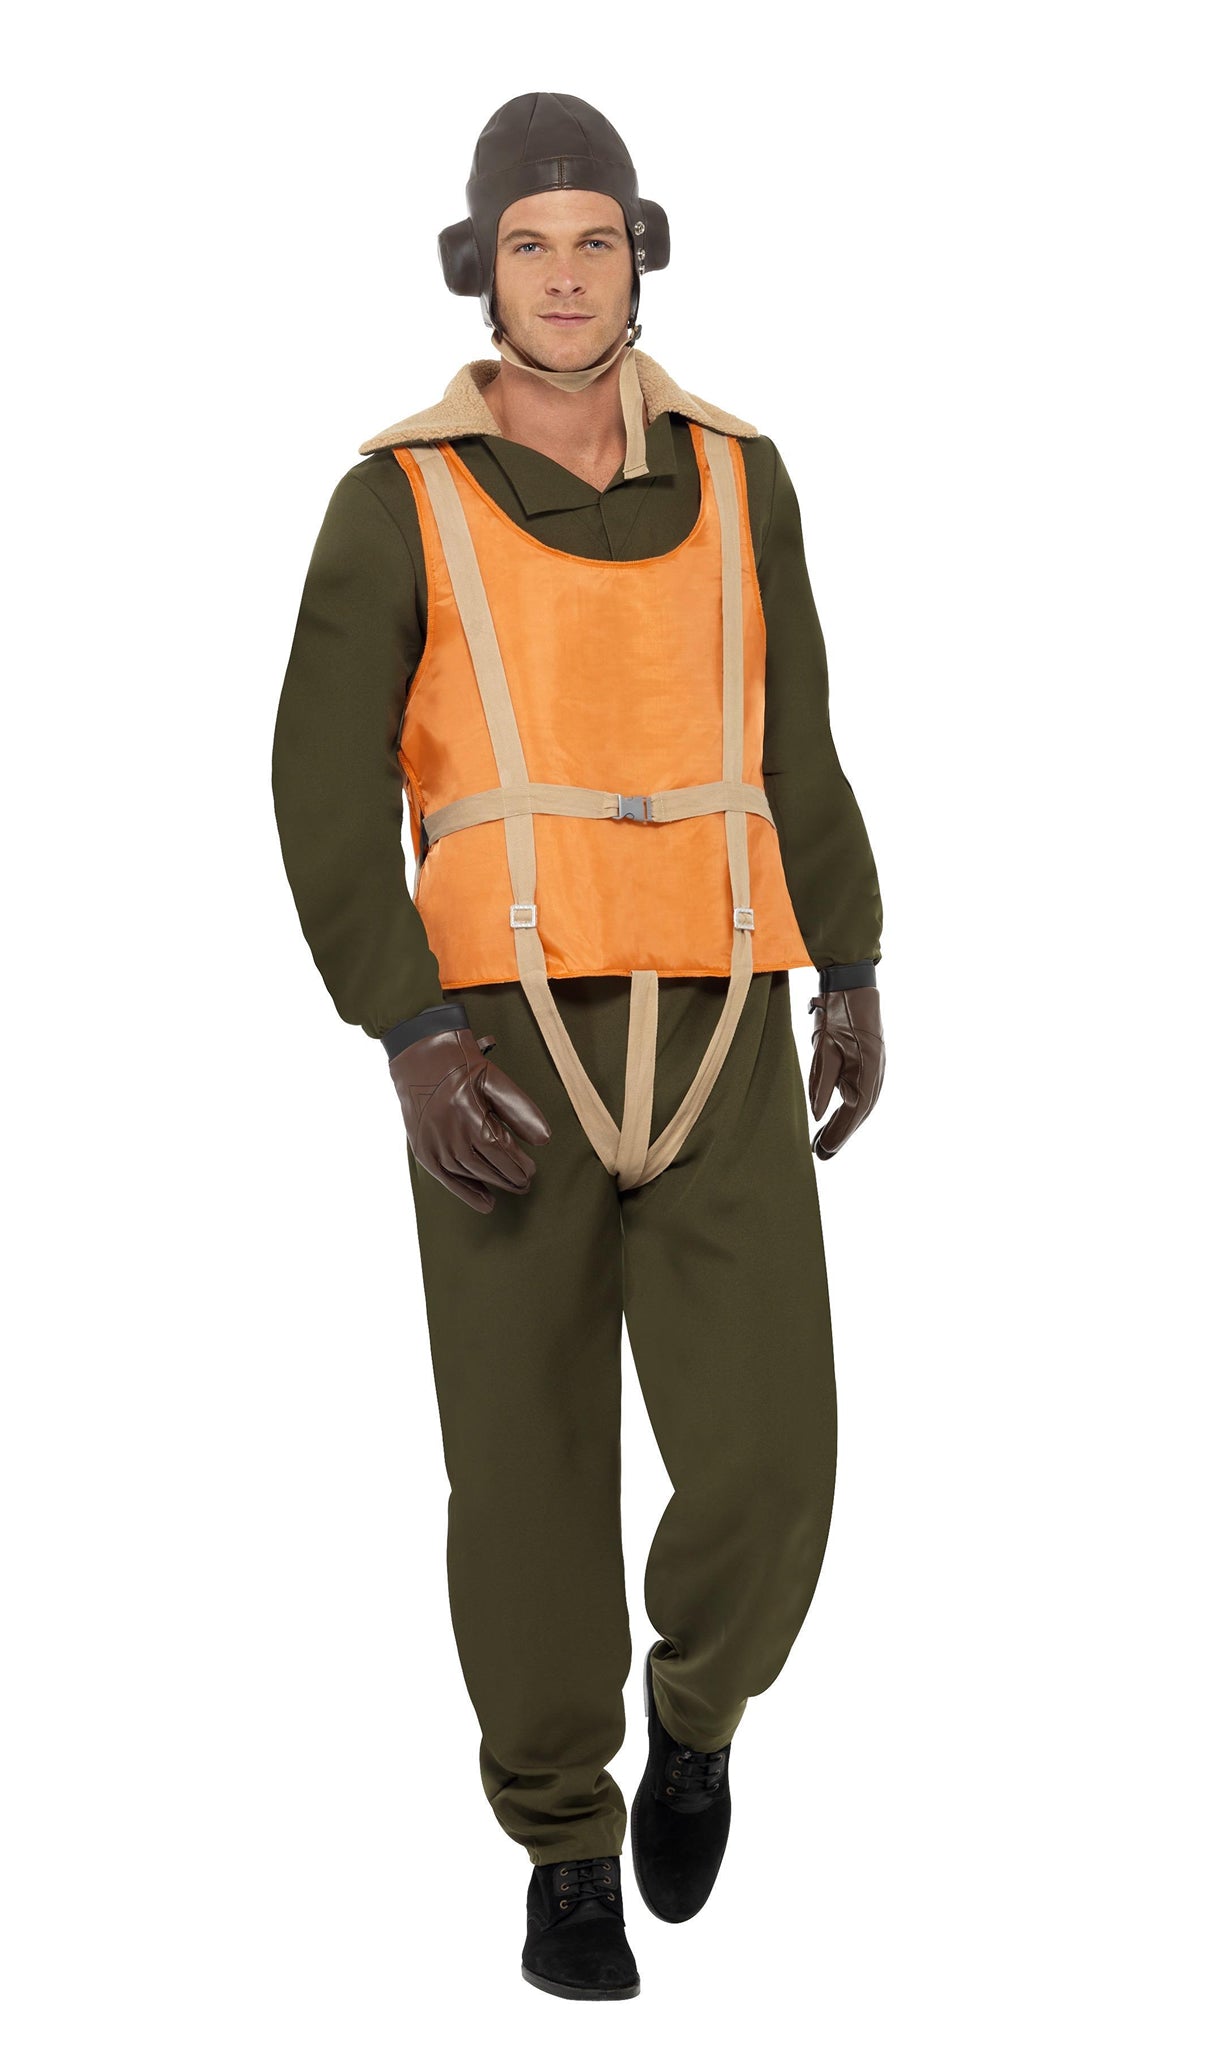 1940s aviator costume with orange life jacket, gloves, hat and jumpsuit